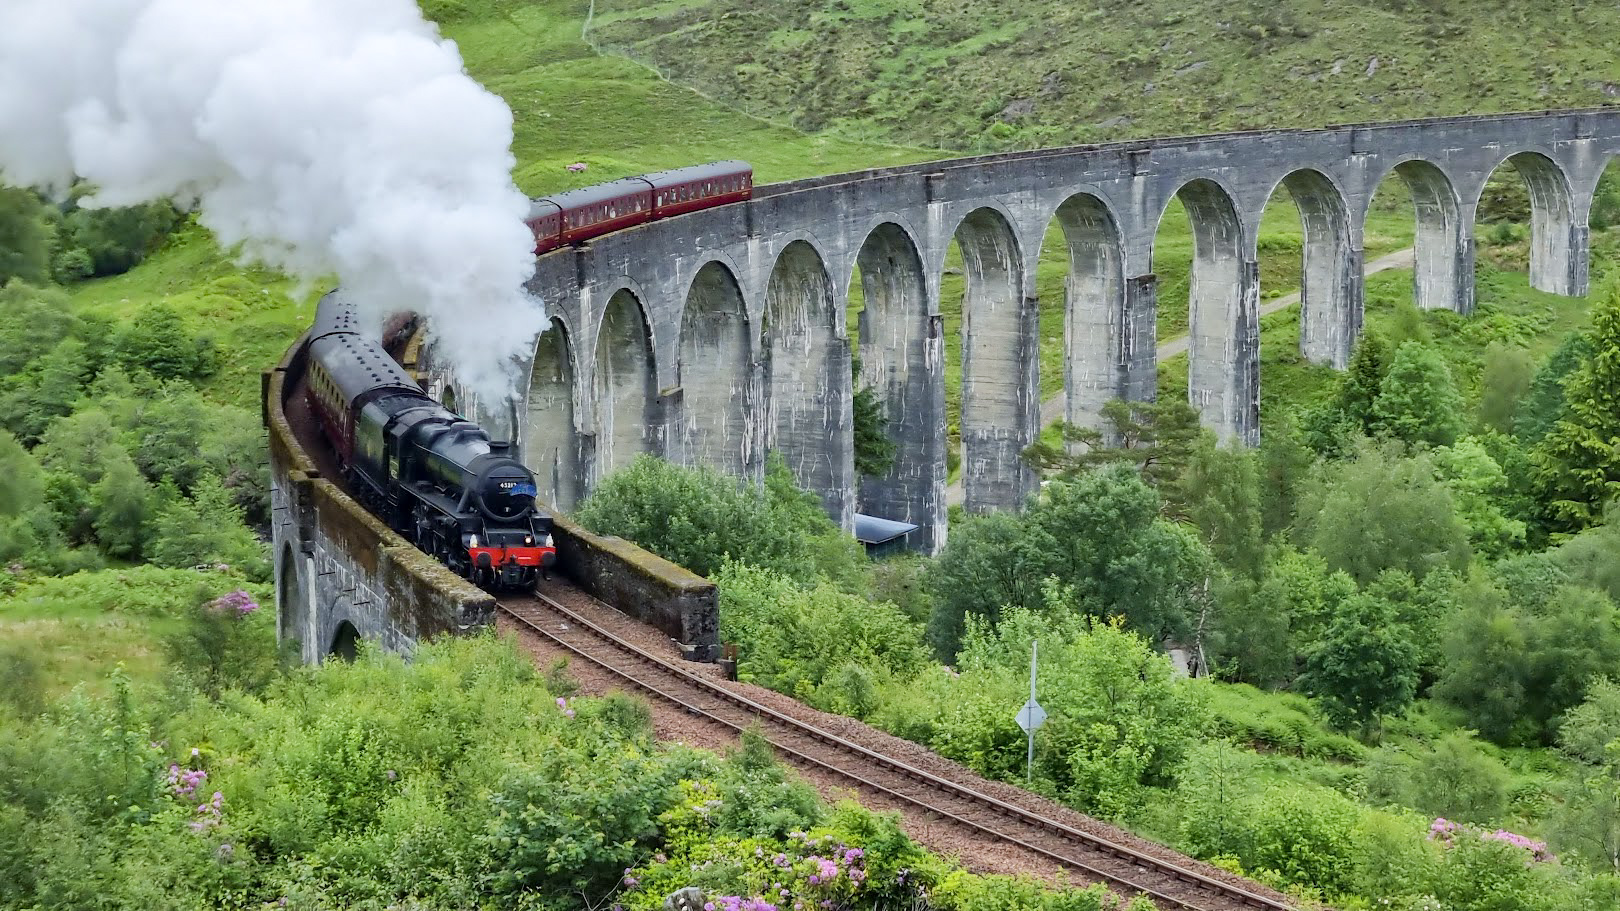 12 Reasons to Fall in Love with Train Travel